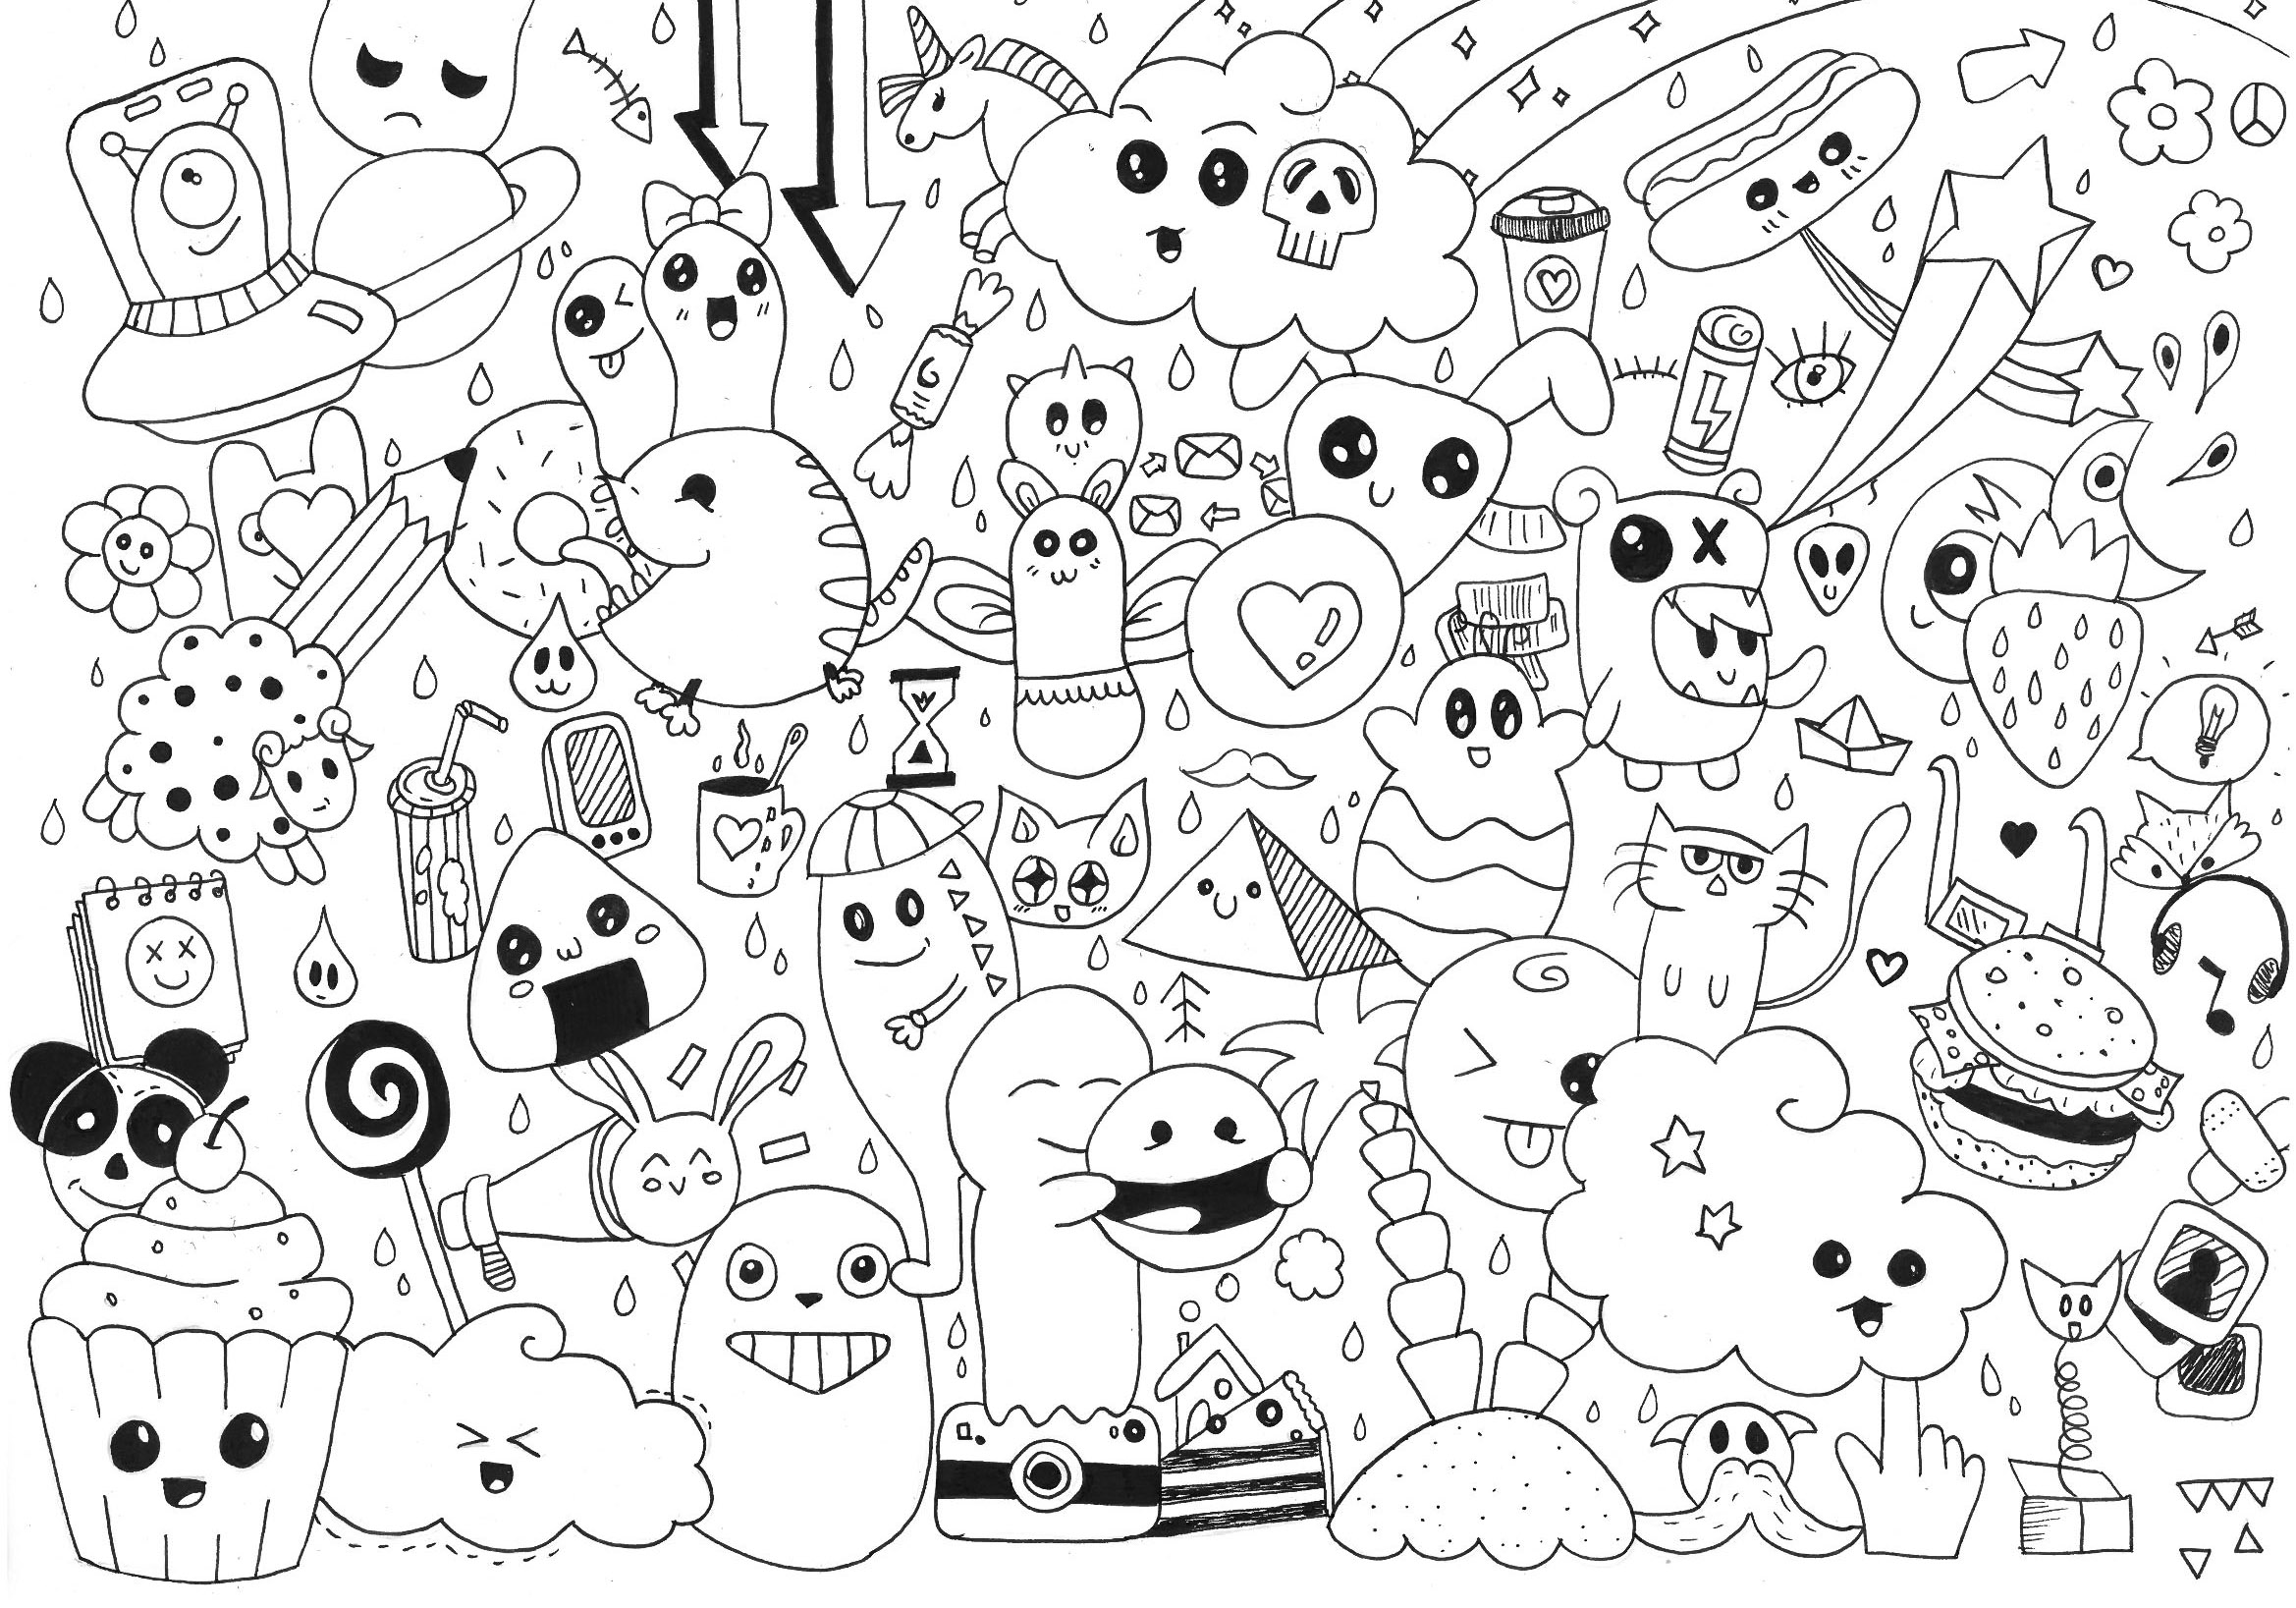 Download Doodle Coloring Pages for Adults | Top Free Printable ...